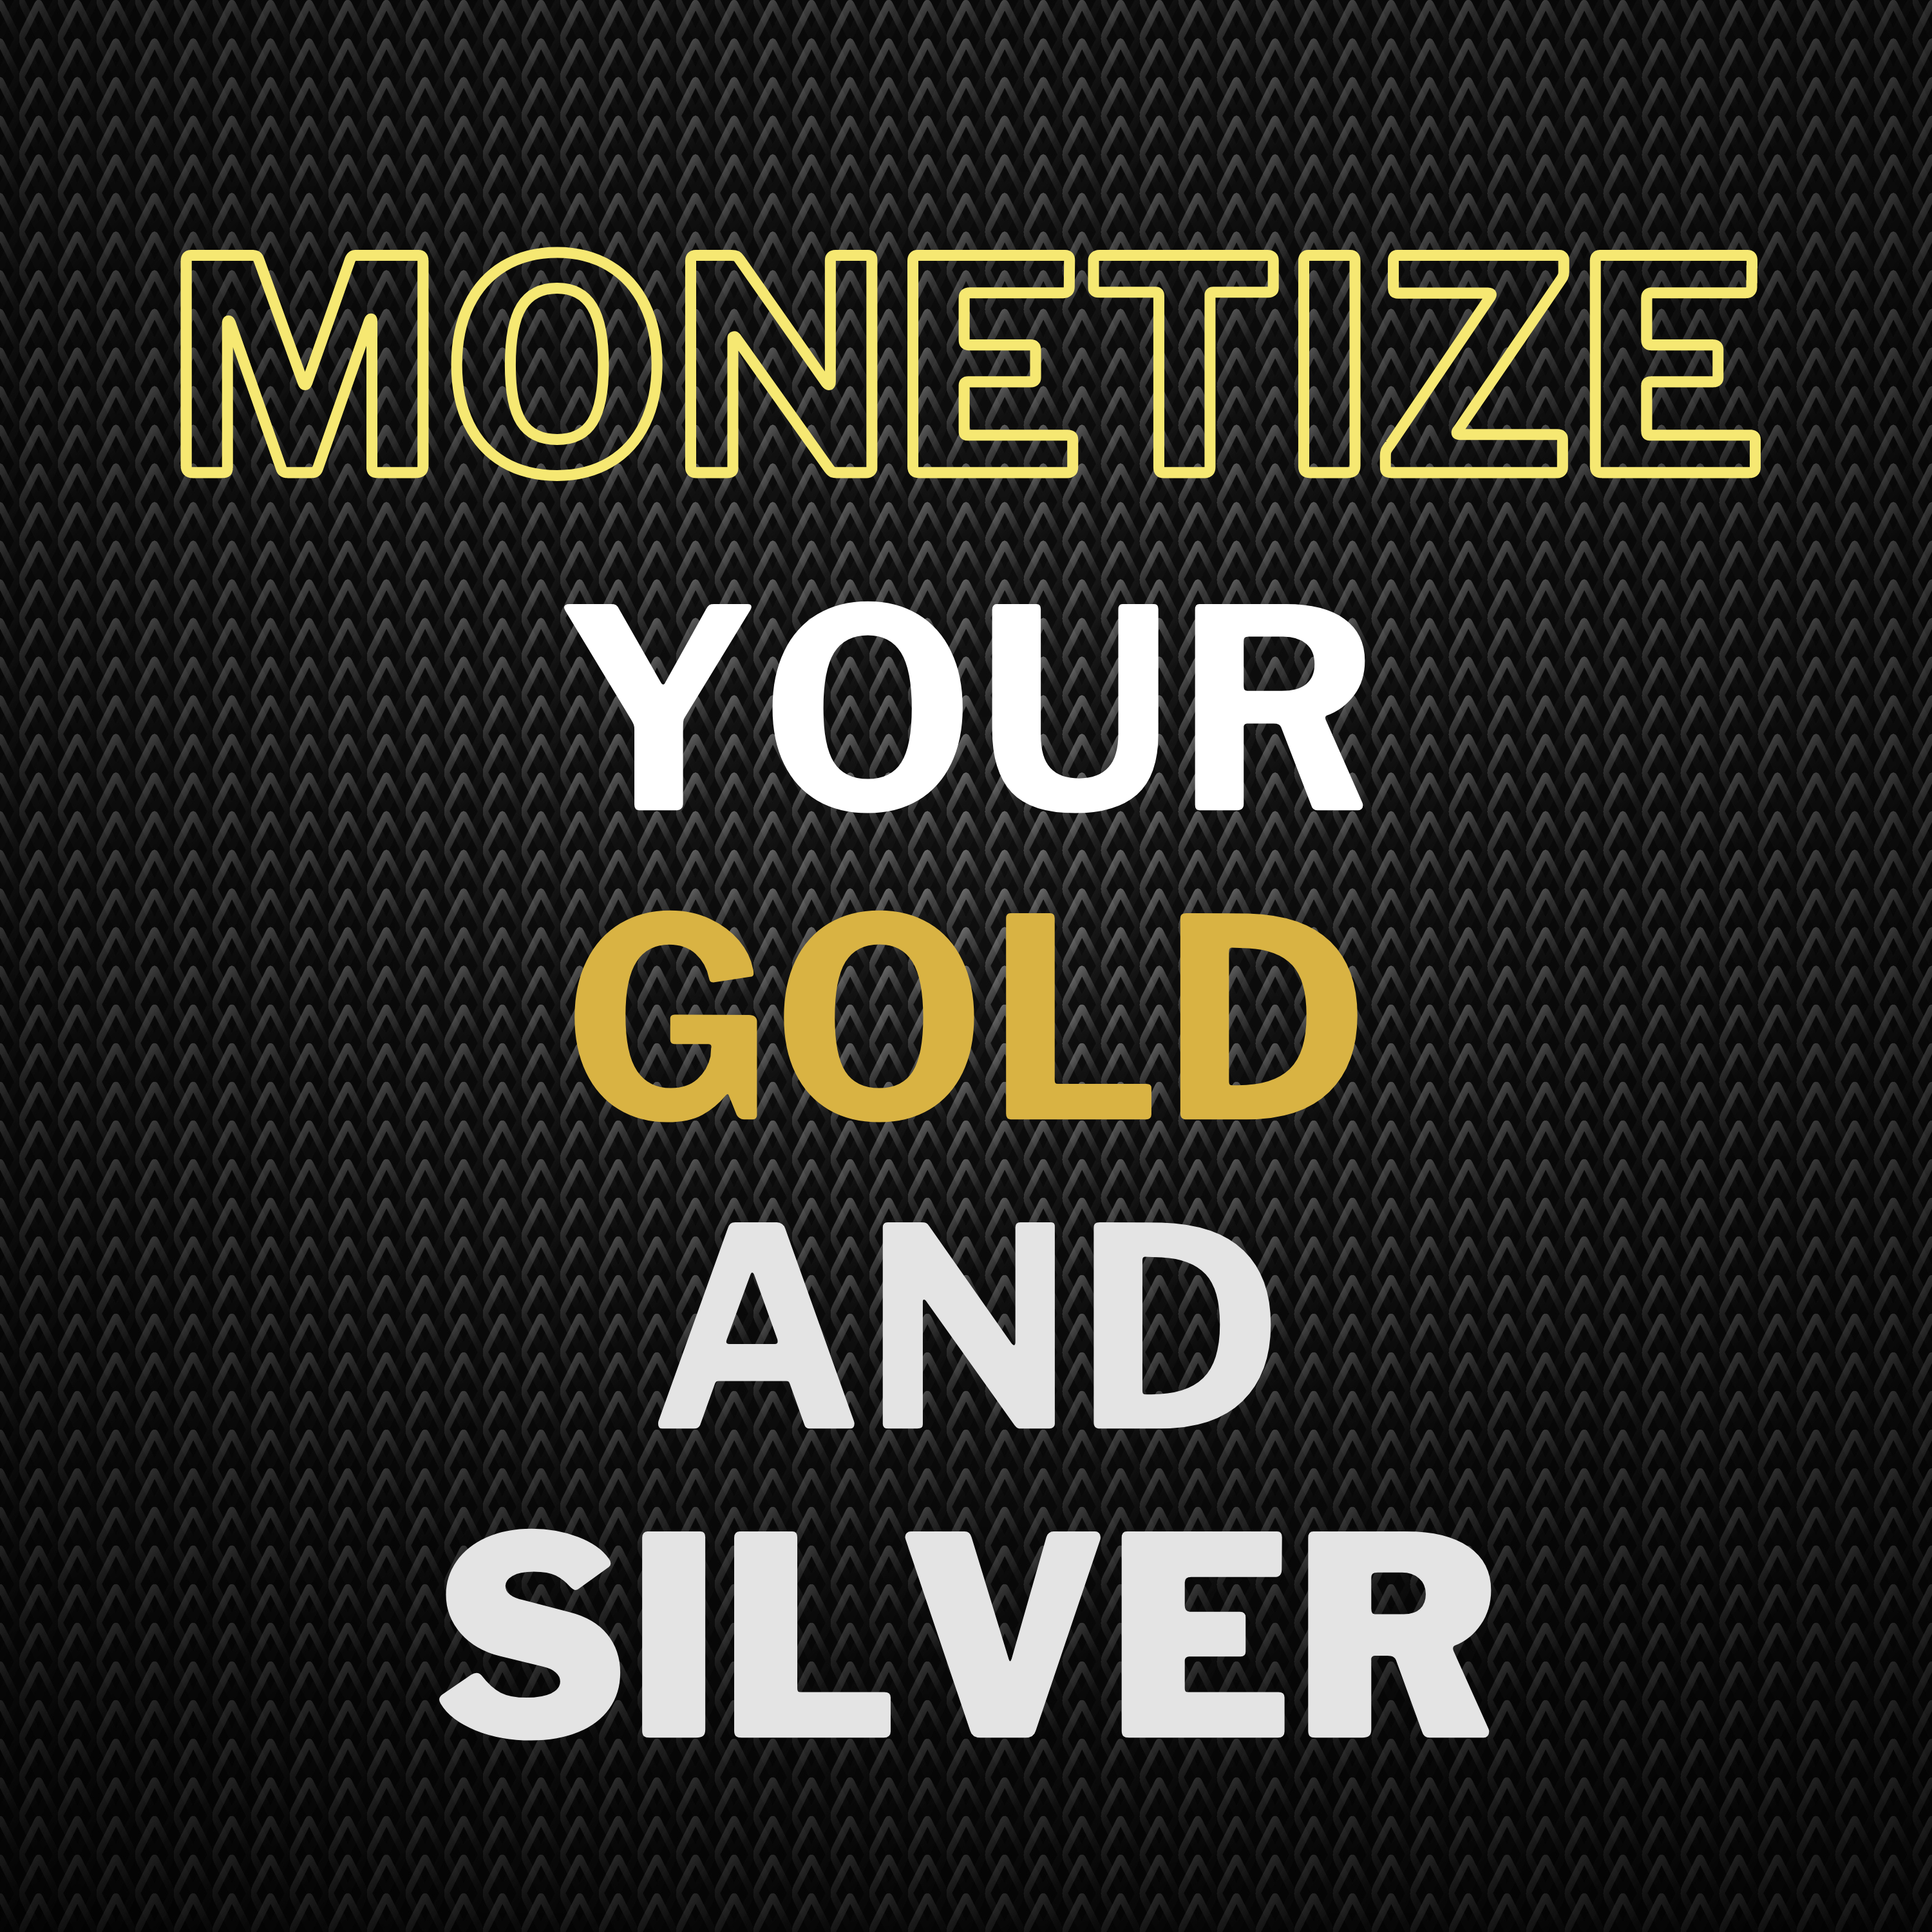 How to Monetize Gold and Silver